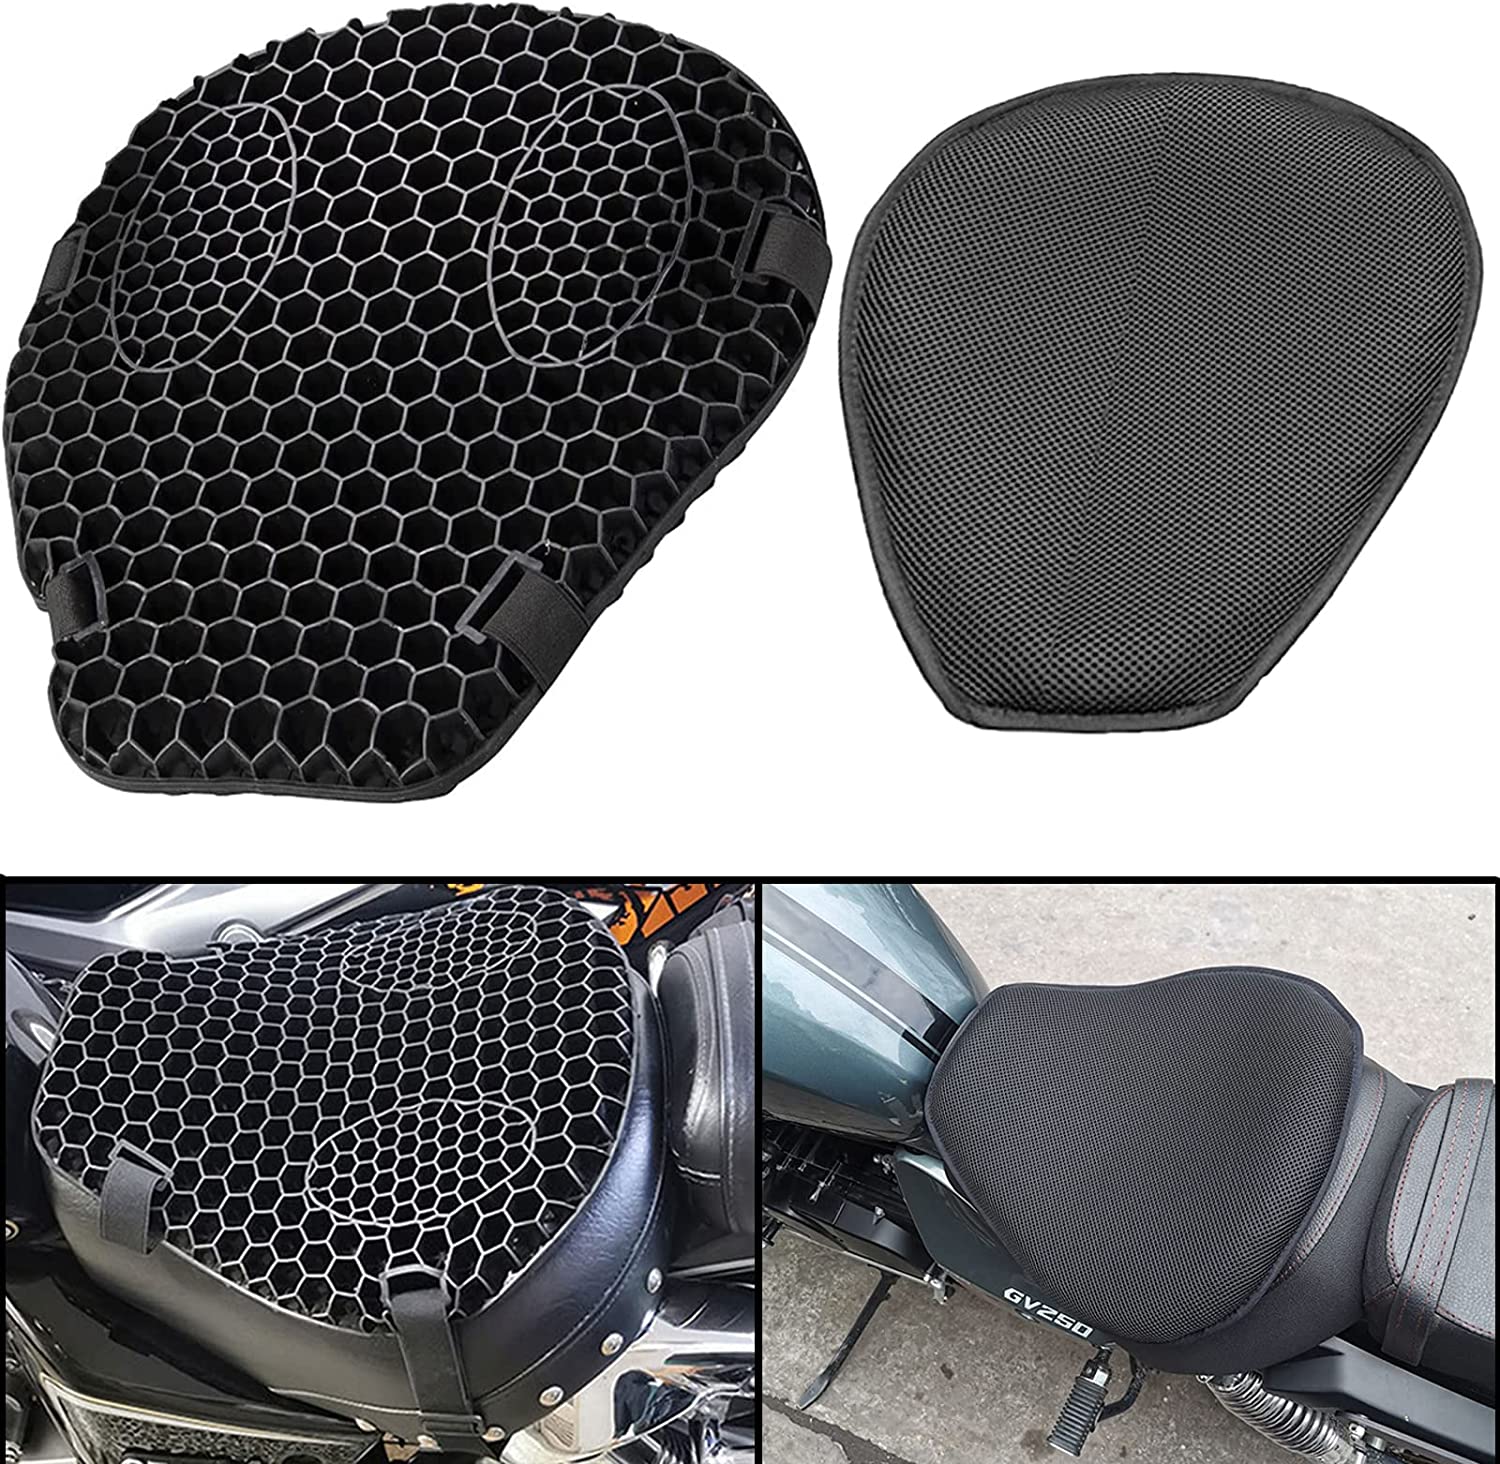 Honeycomb Egg Sitter Seat Cushion, Size: 15x16.5 inch at Rs 350